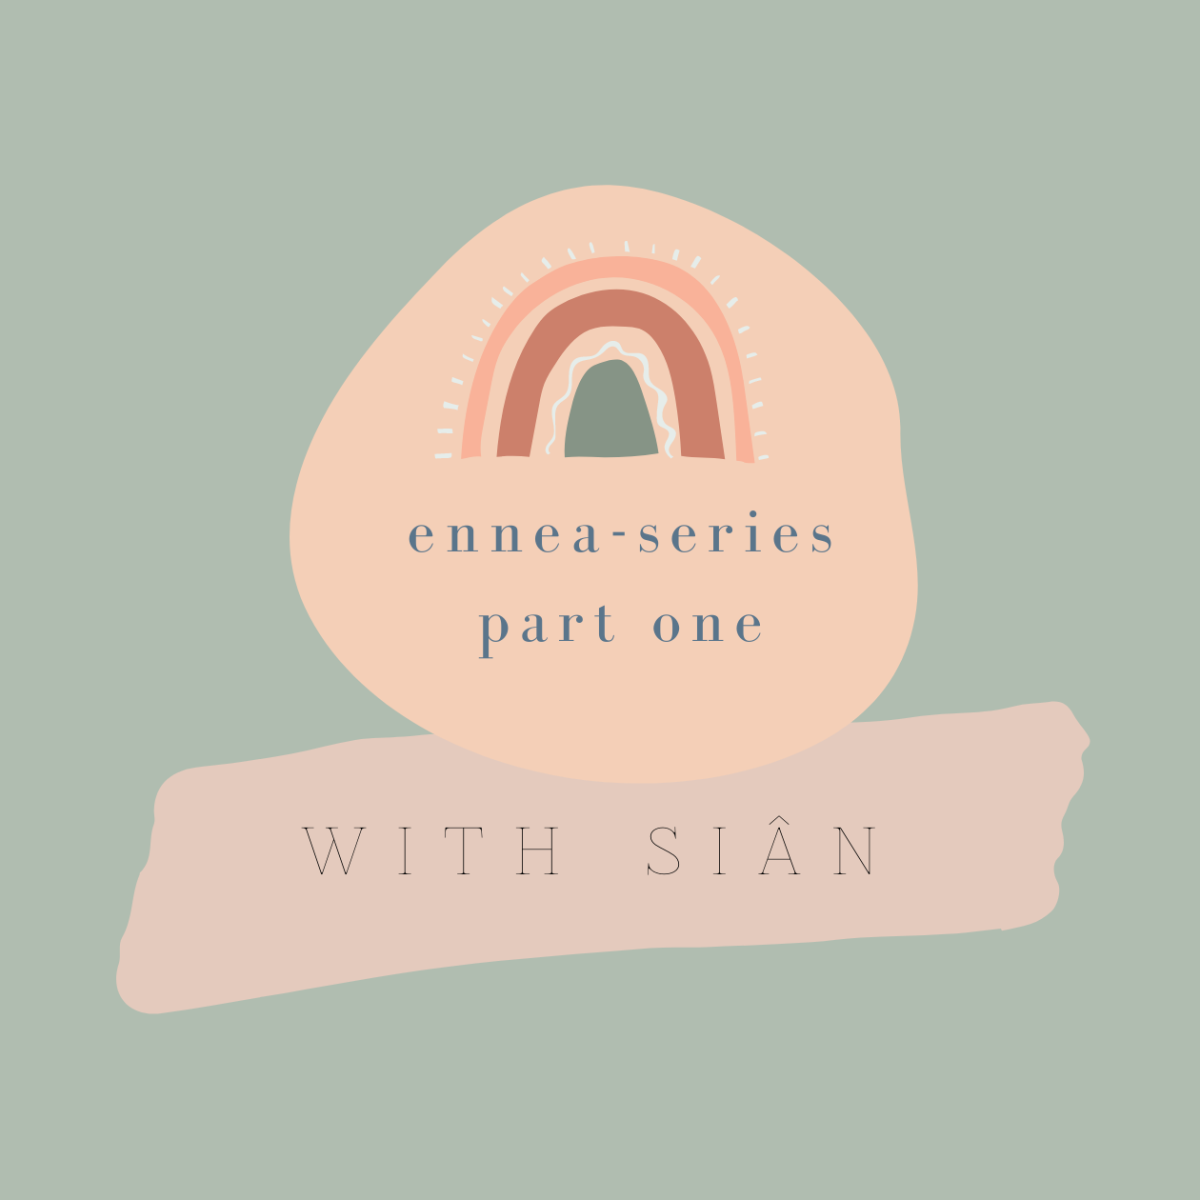 Enneaseries: What’s the Enneagram all about?